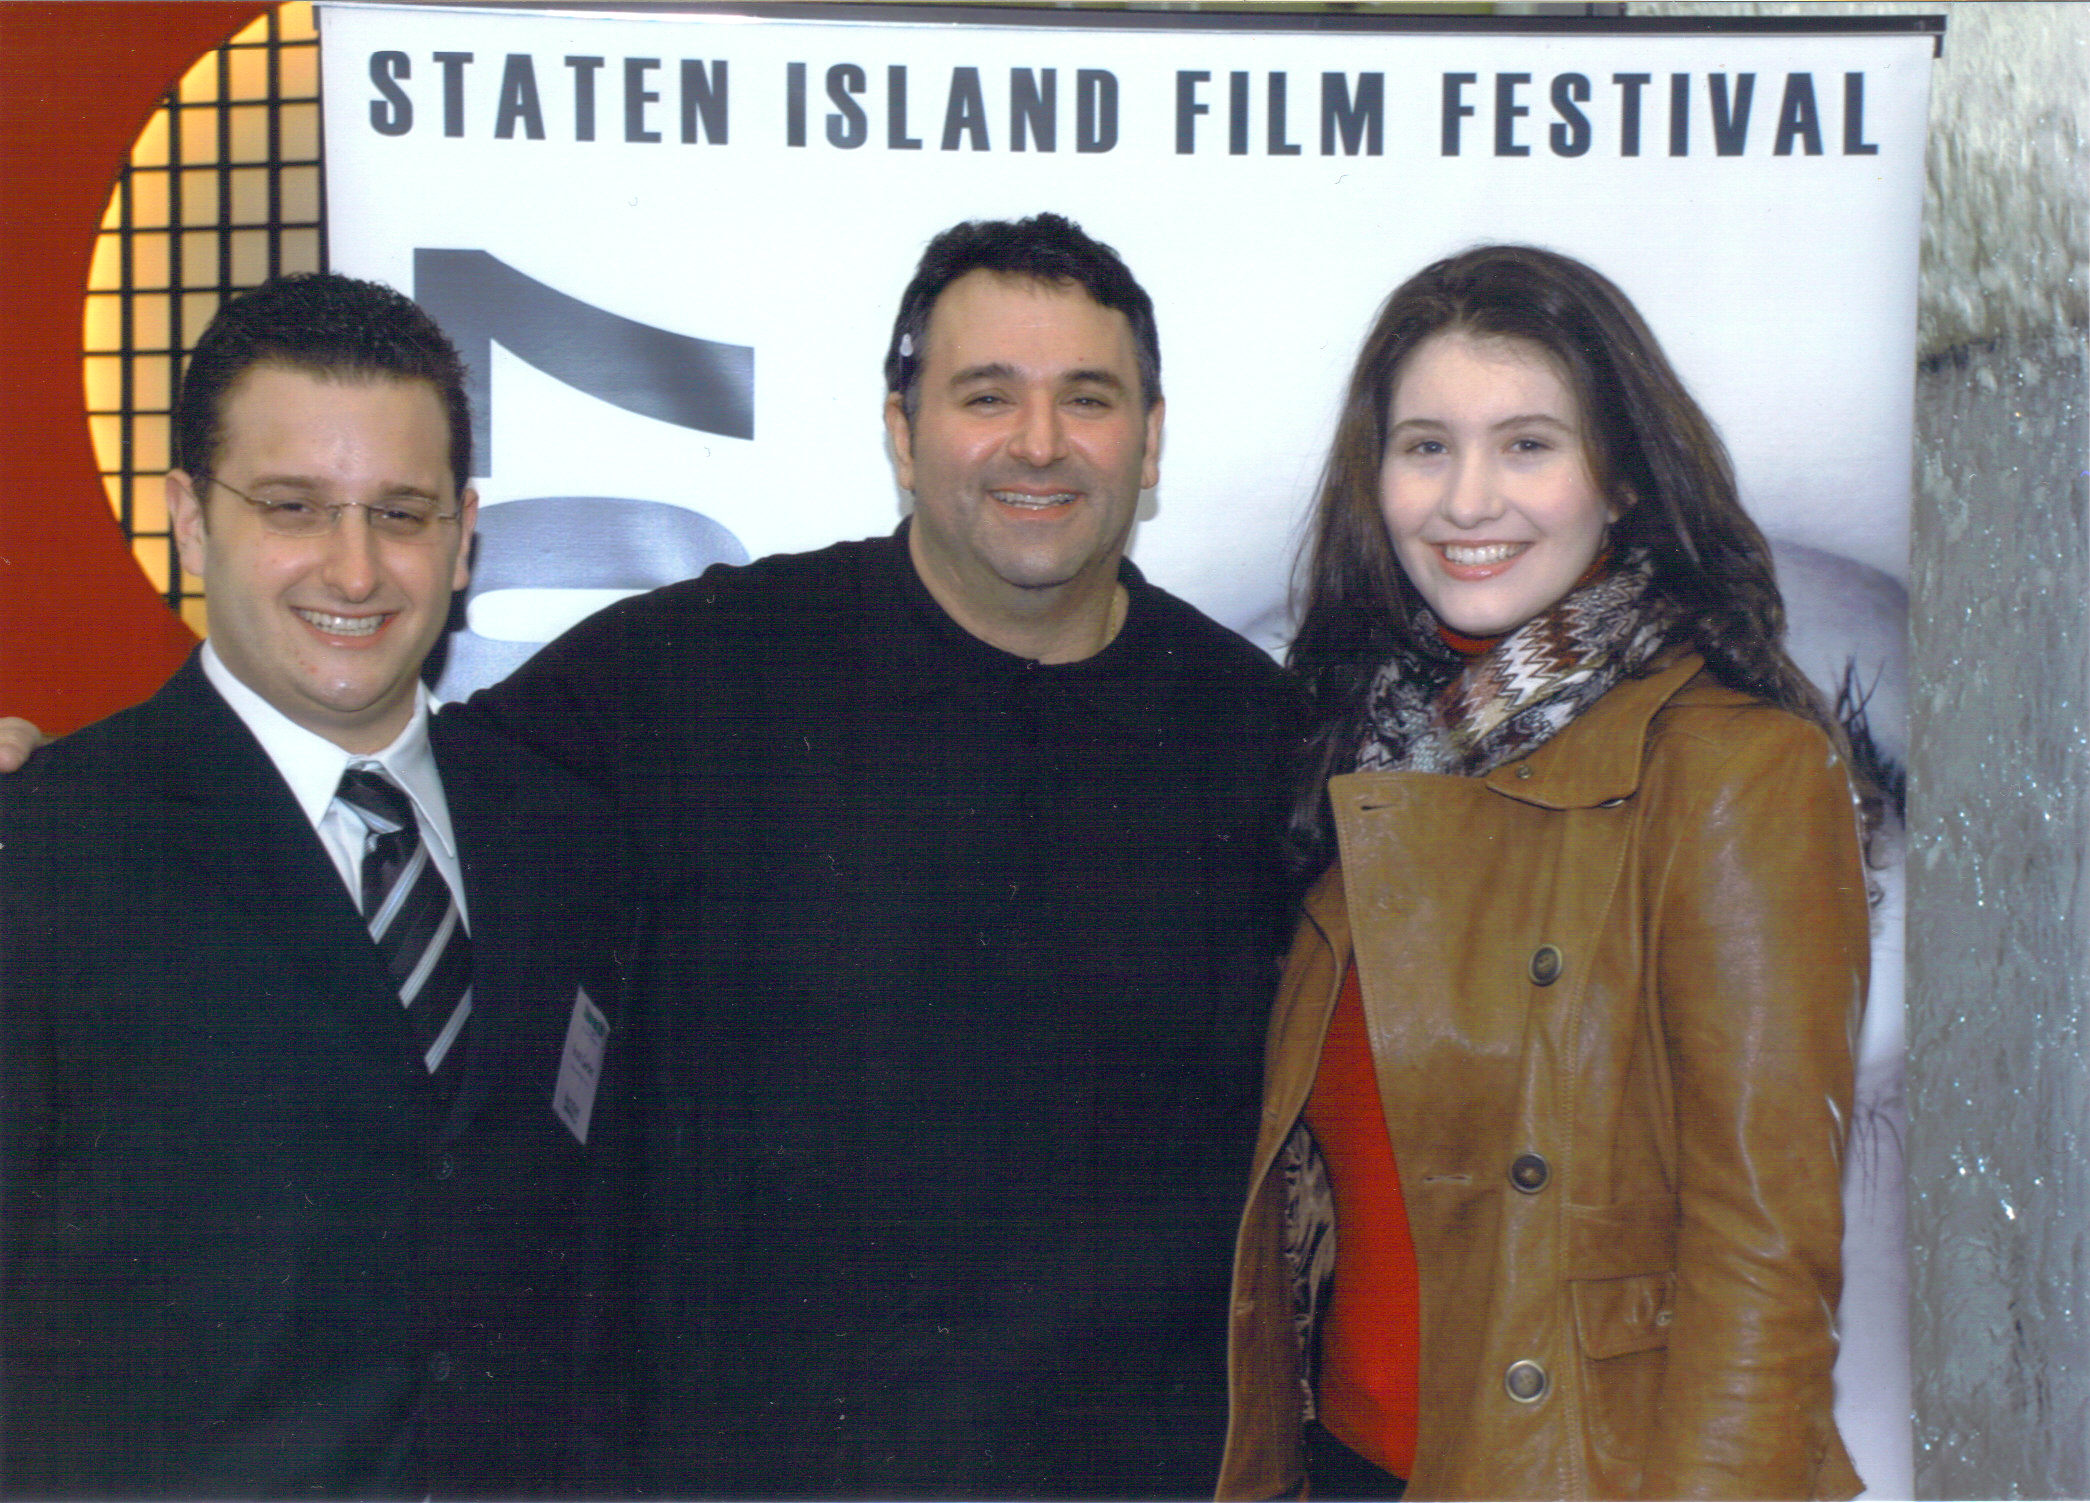 Scott Gerber (L), Director of Programming for SINY Film Festival with Filmmaker Sam Borowski (center) and actress Robin Anne Phipps (R) at Press Conference in April, 2008 to announce REX as a BEST PICTURE nominee.